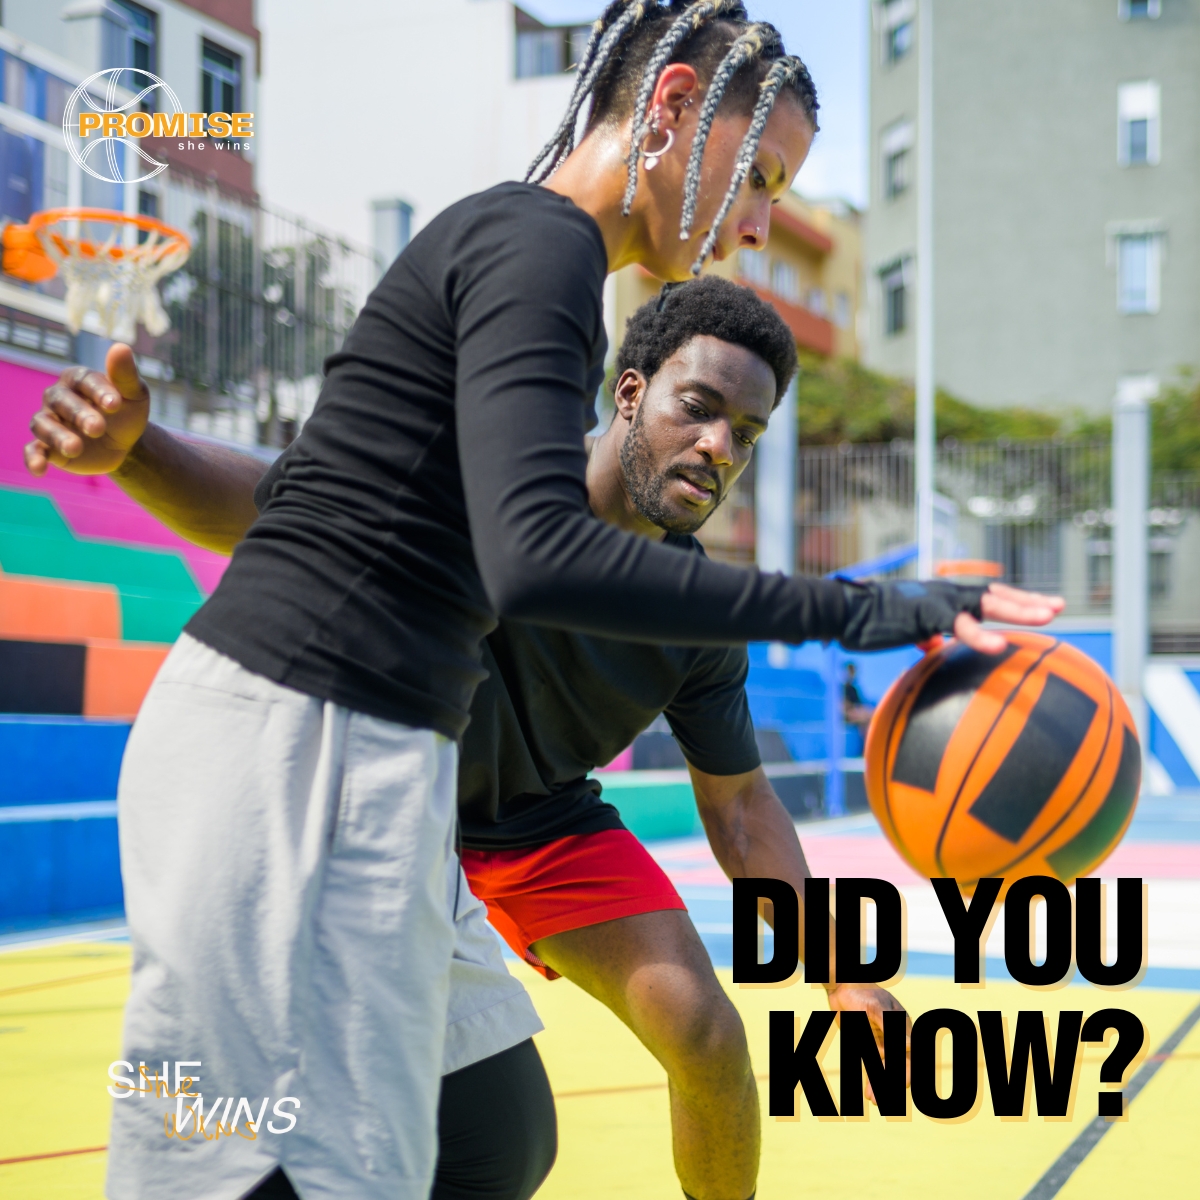 💯Fun Fact: Did you know that in early basketball, players weren't allowed to advance the ball by dribbling?

#PROMISE #dunkthestigma #promisebasketball